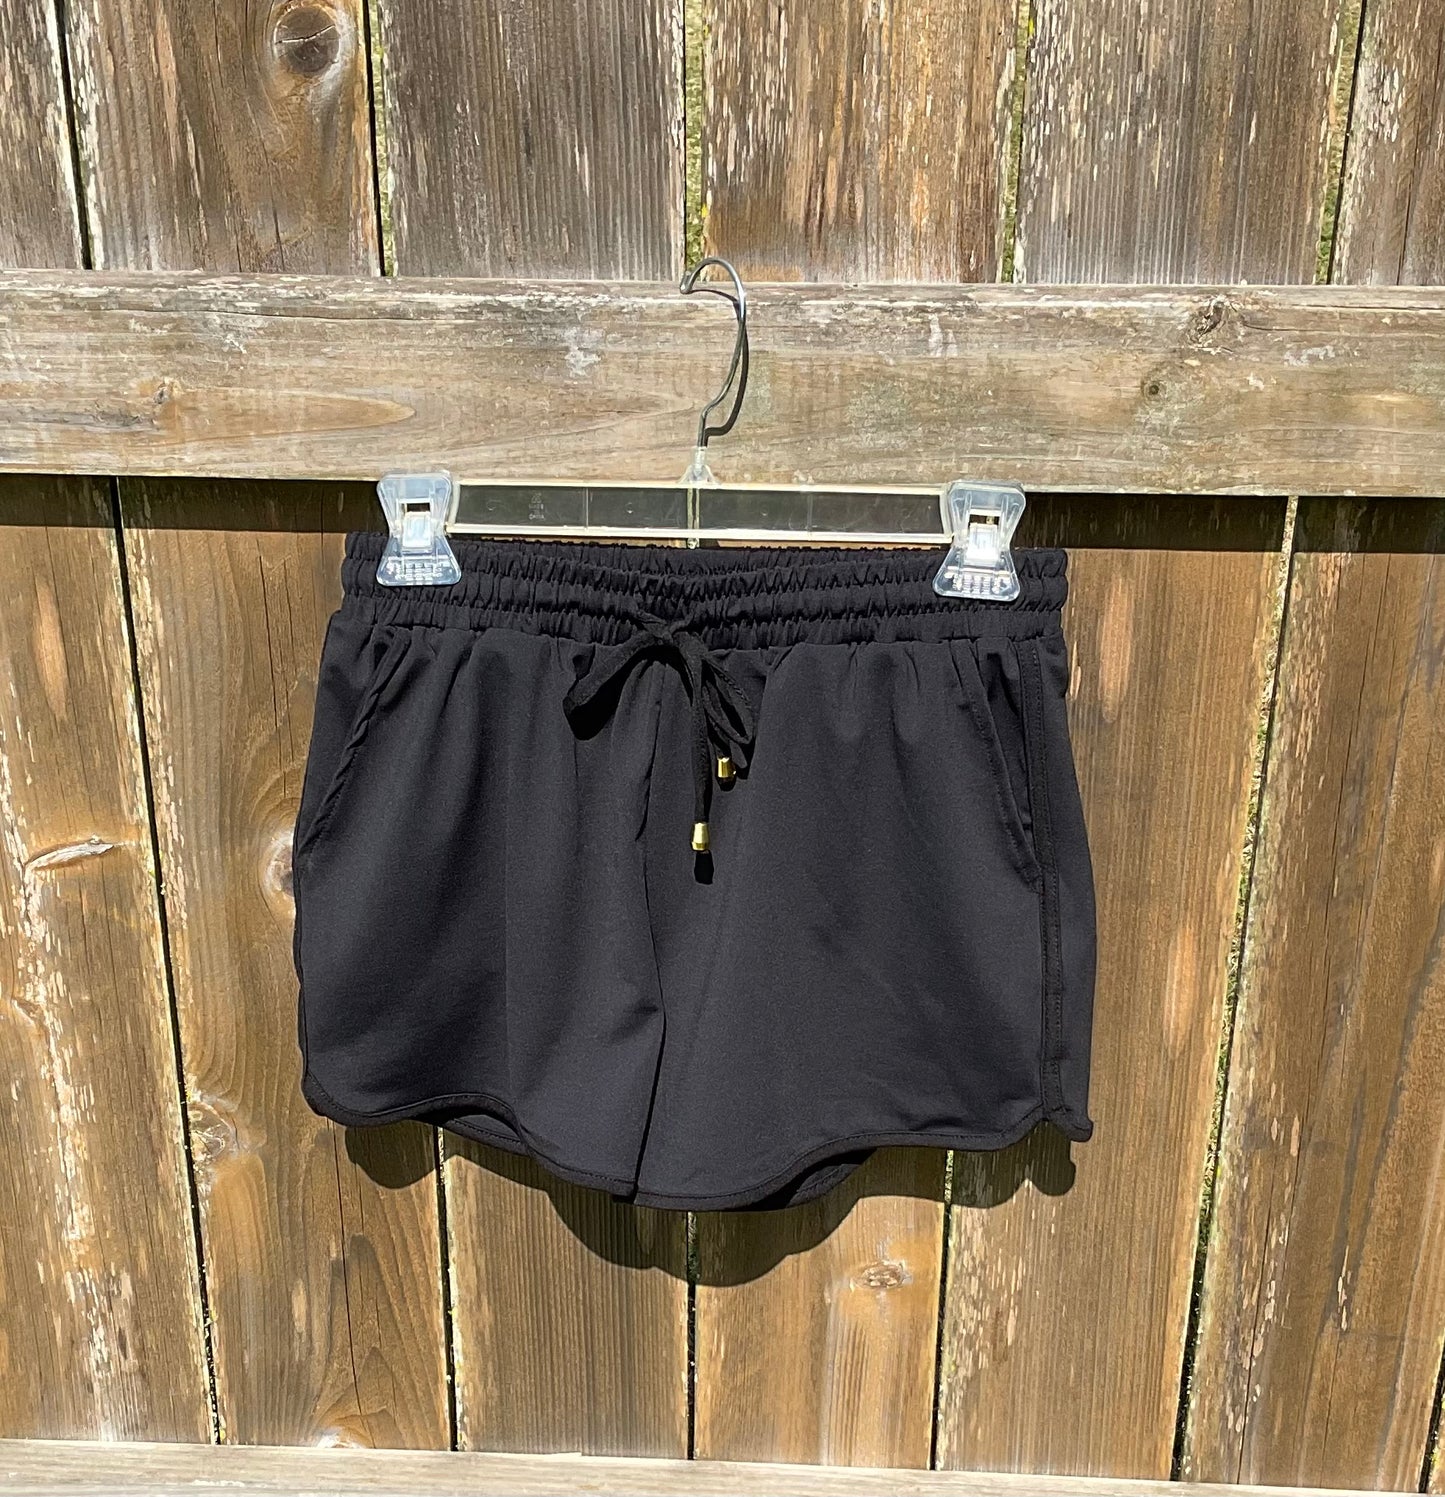 The After Dark Shorts